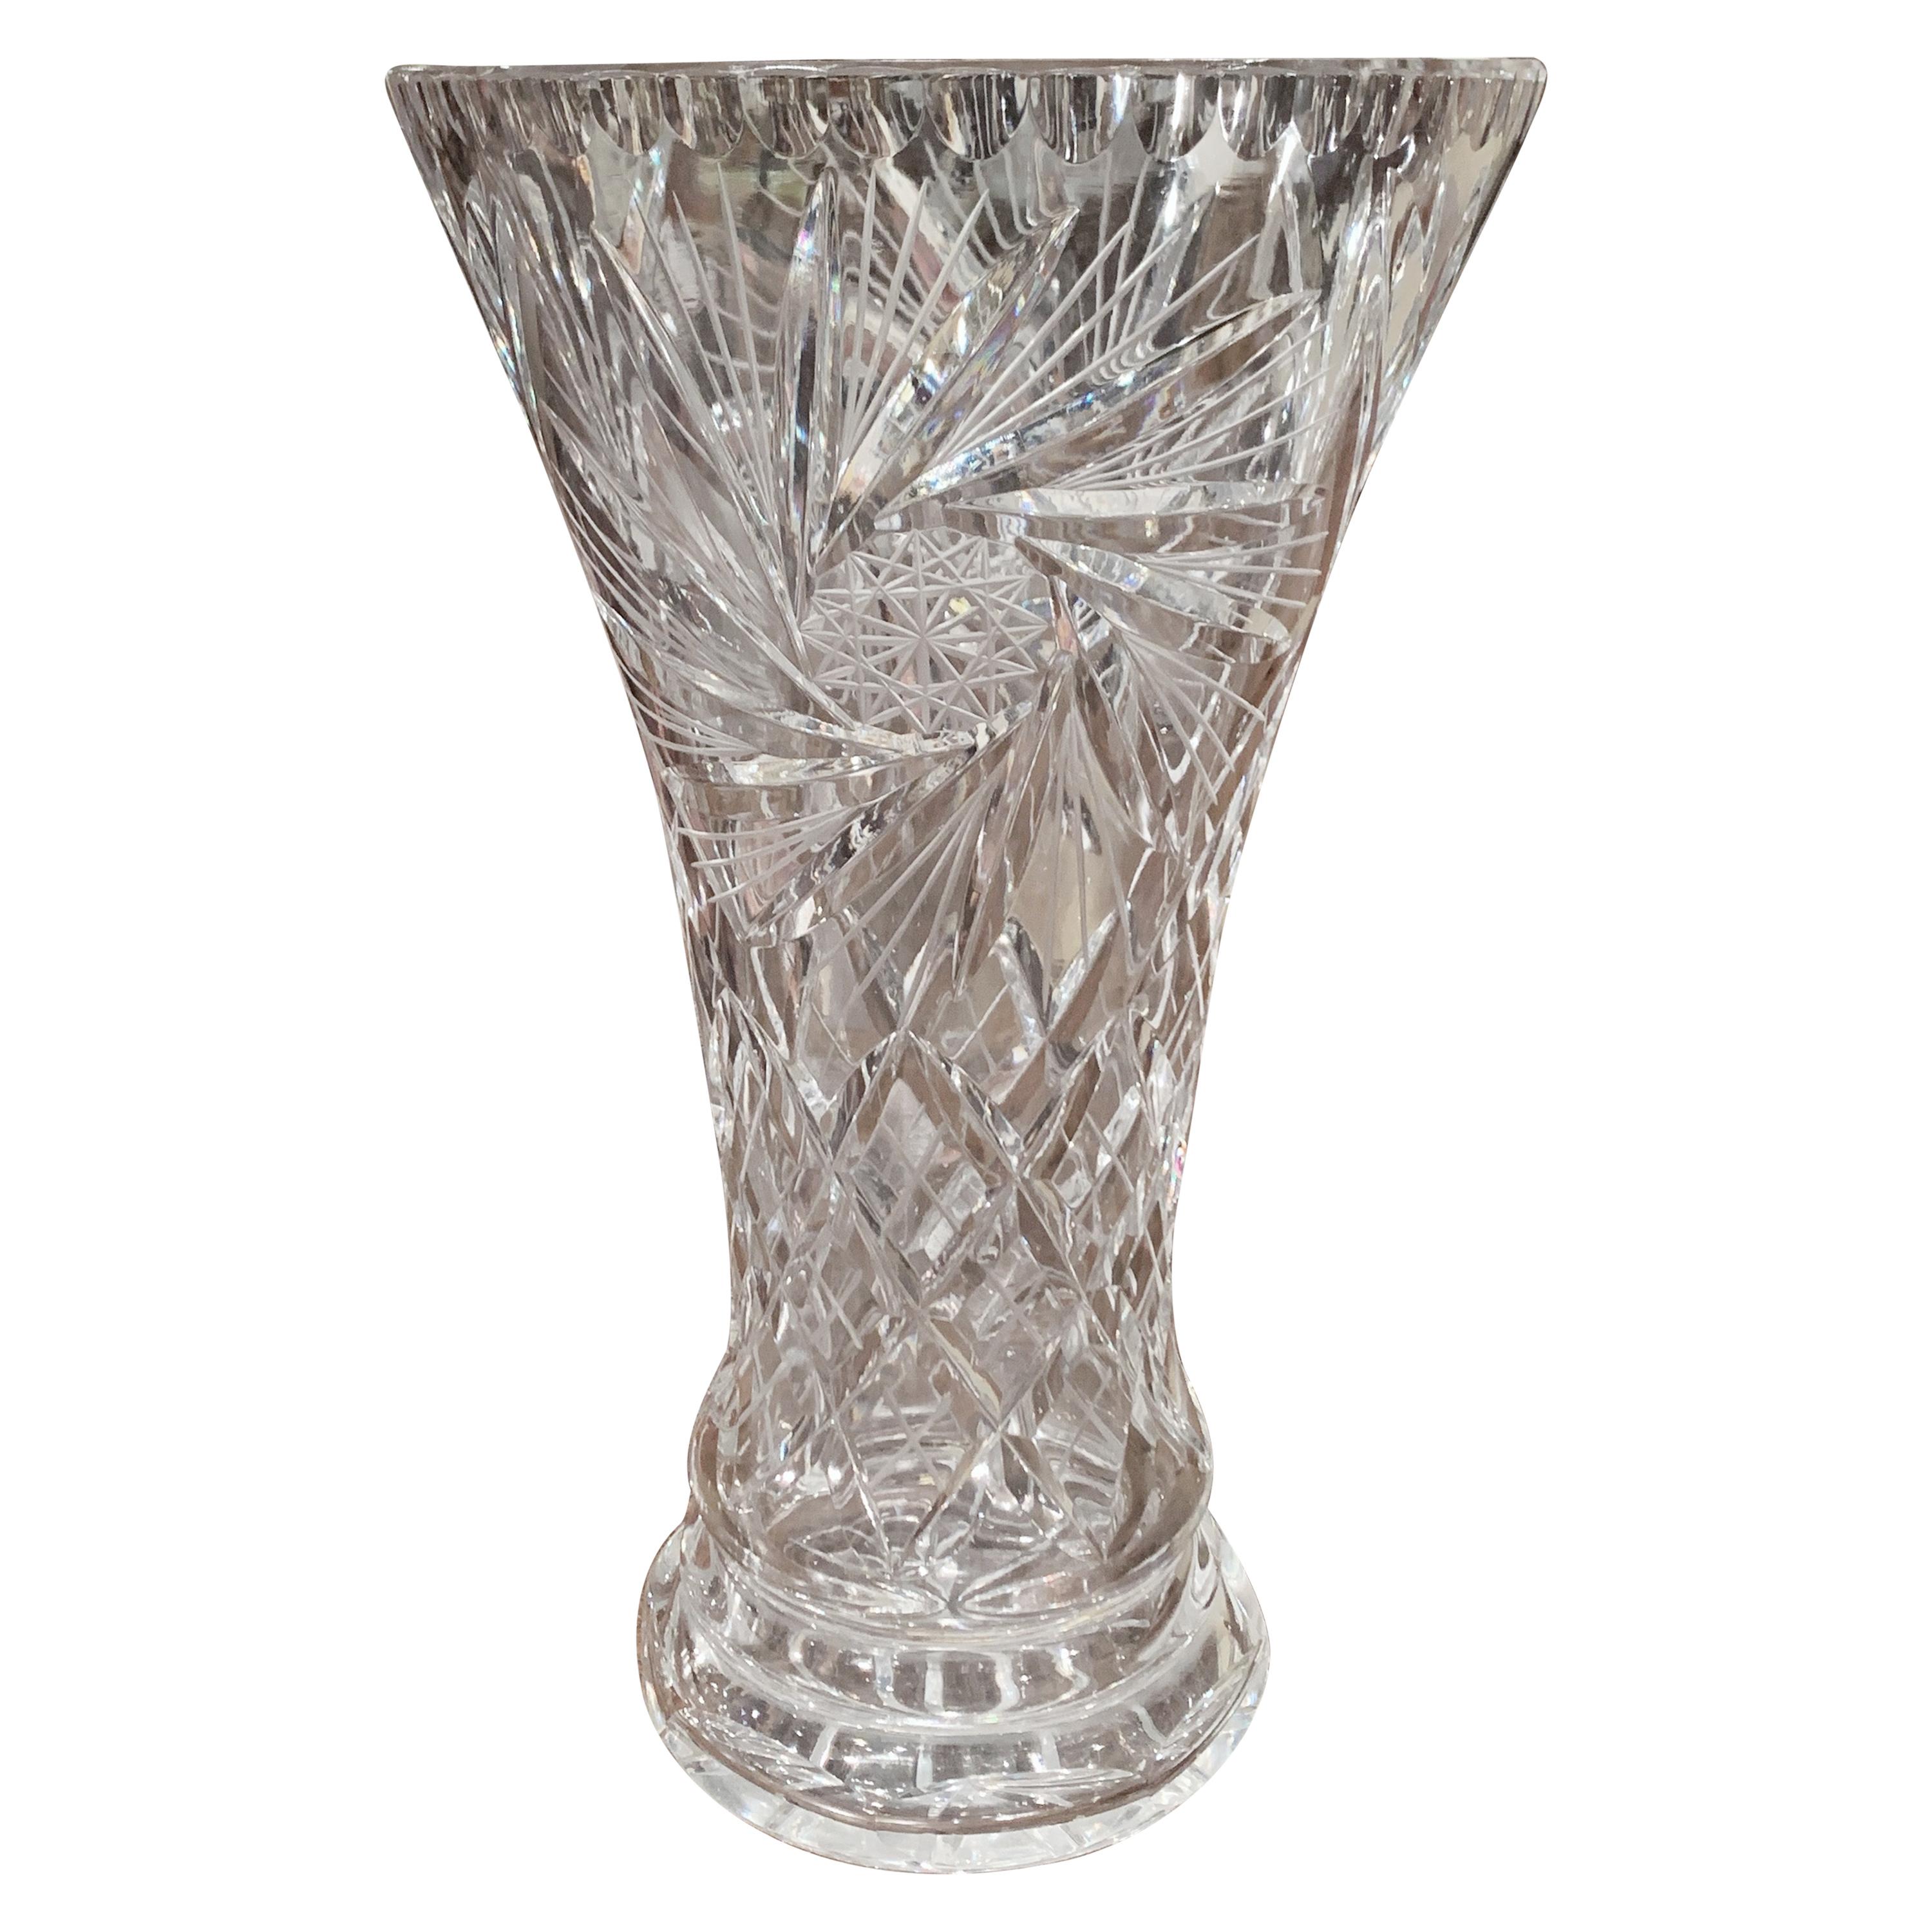 Midcentury Clear Cut Crystal Trumpet Vase with Geometric and Sun Motifs